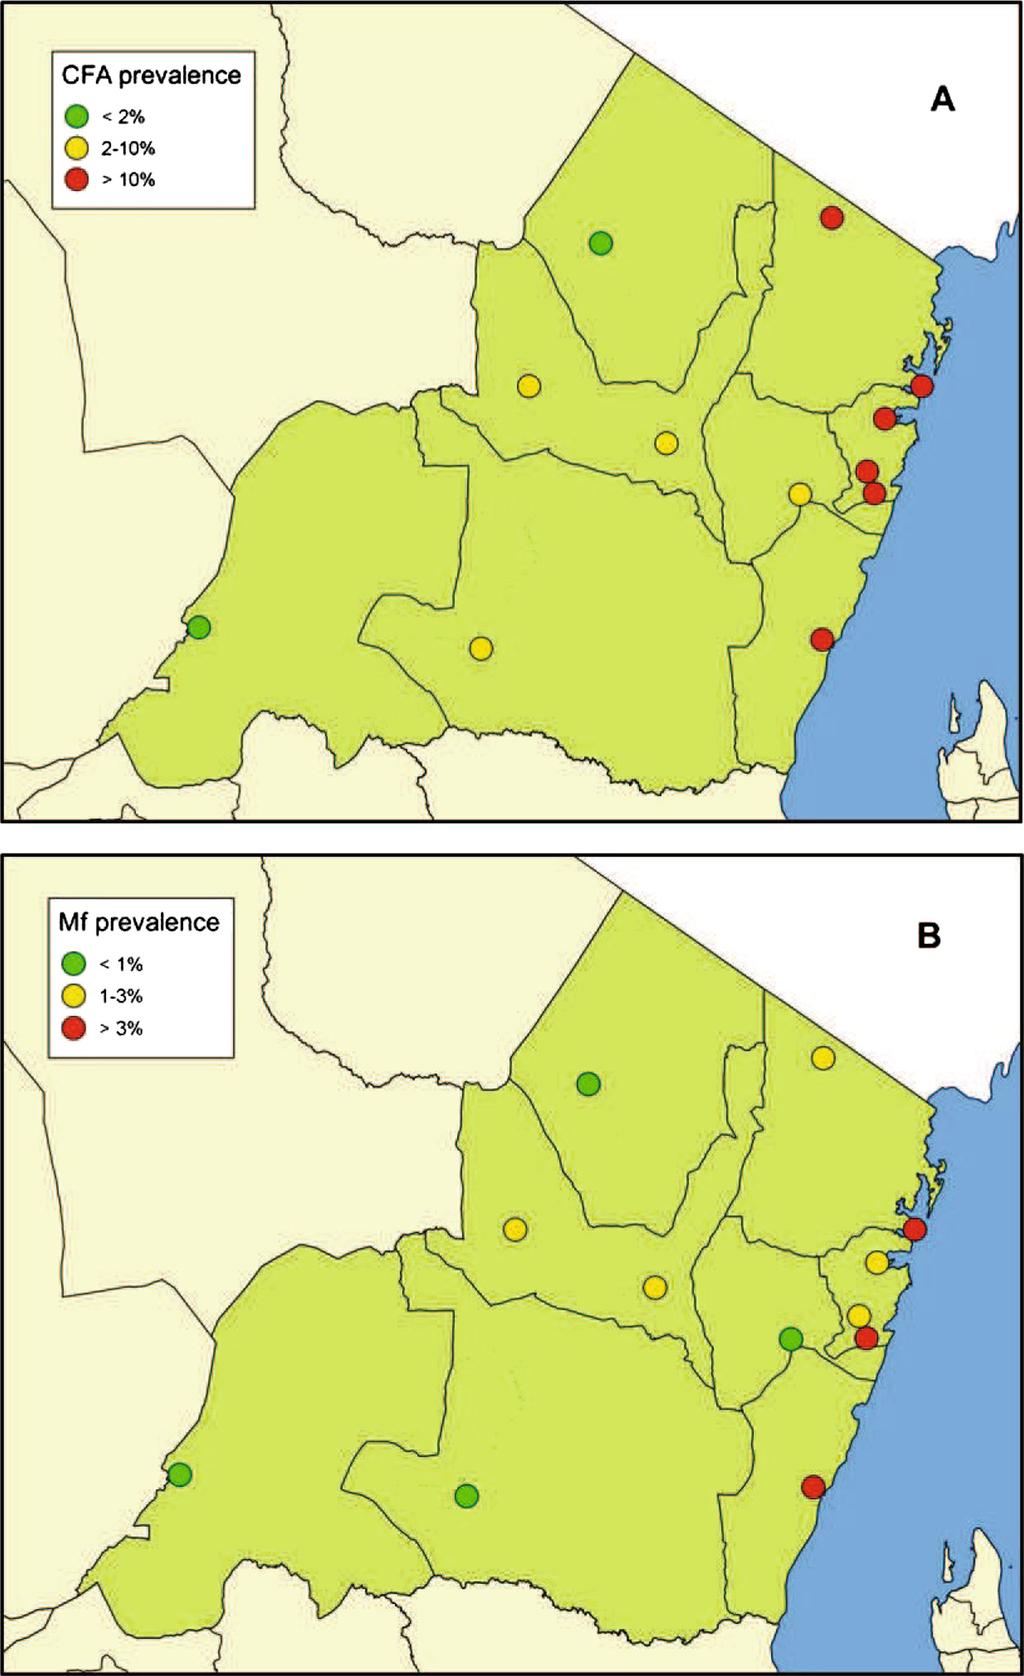 Simonsen et al. Parasites & Vectors 2014, 7:507 Page 16 of 19 Figure 6 Map of Tanga Region showing community prevalence of circulating filarial antigens (A) and microfilariaemia (B) in 2013.